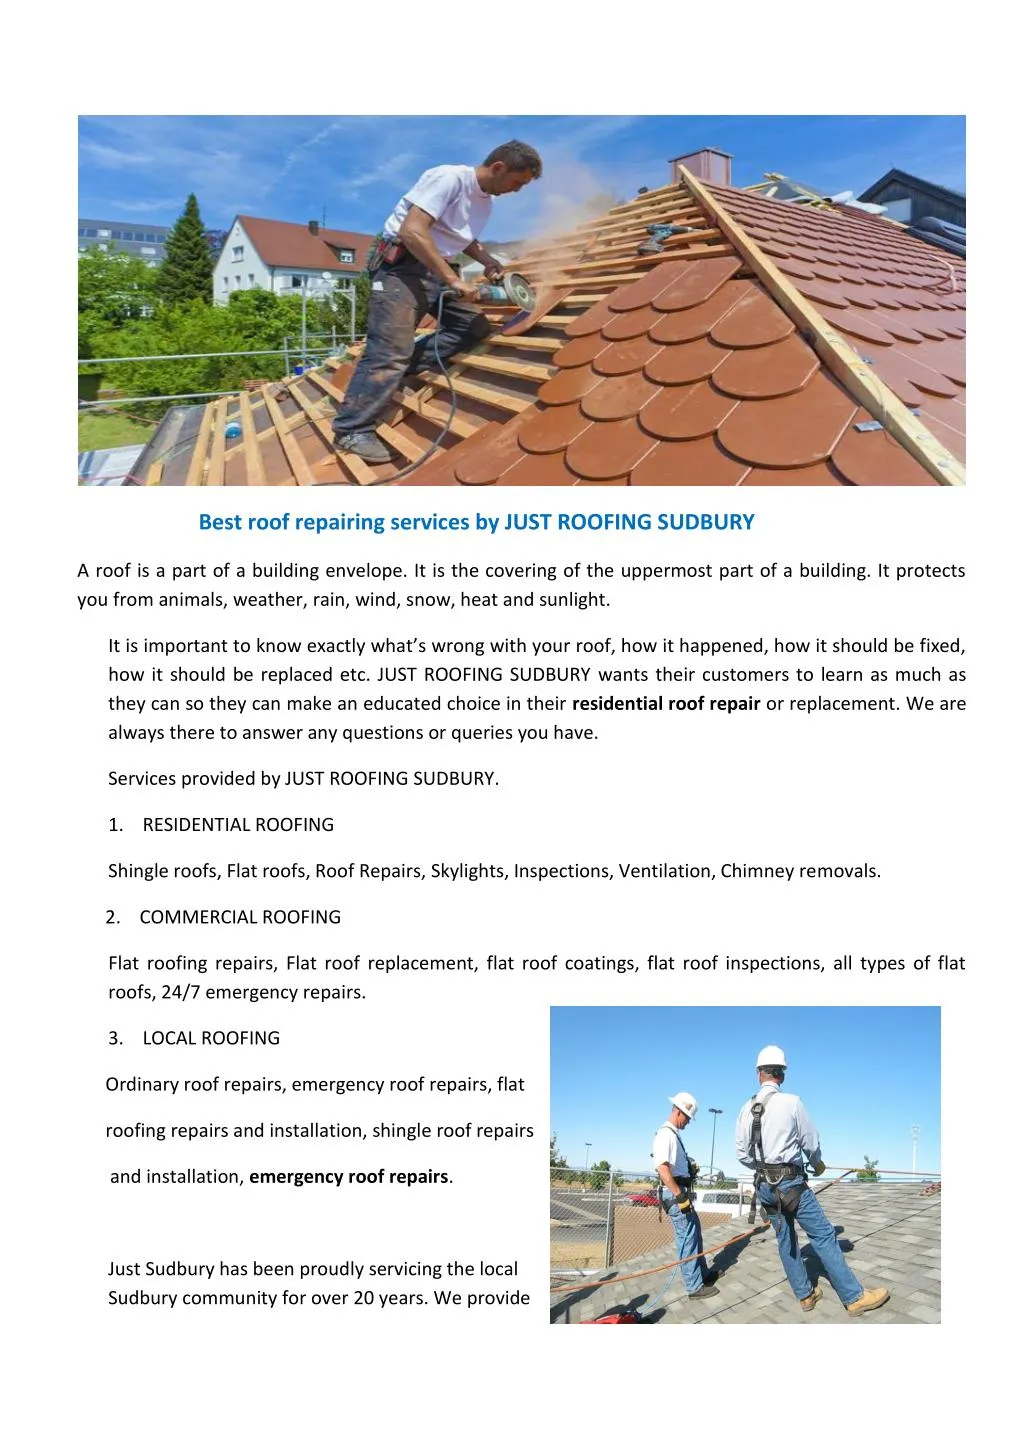 best roof repairing services by just roofing